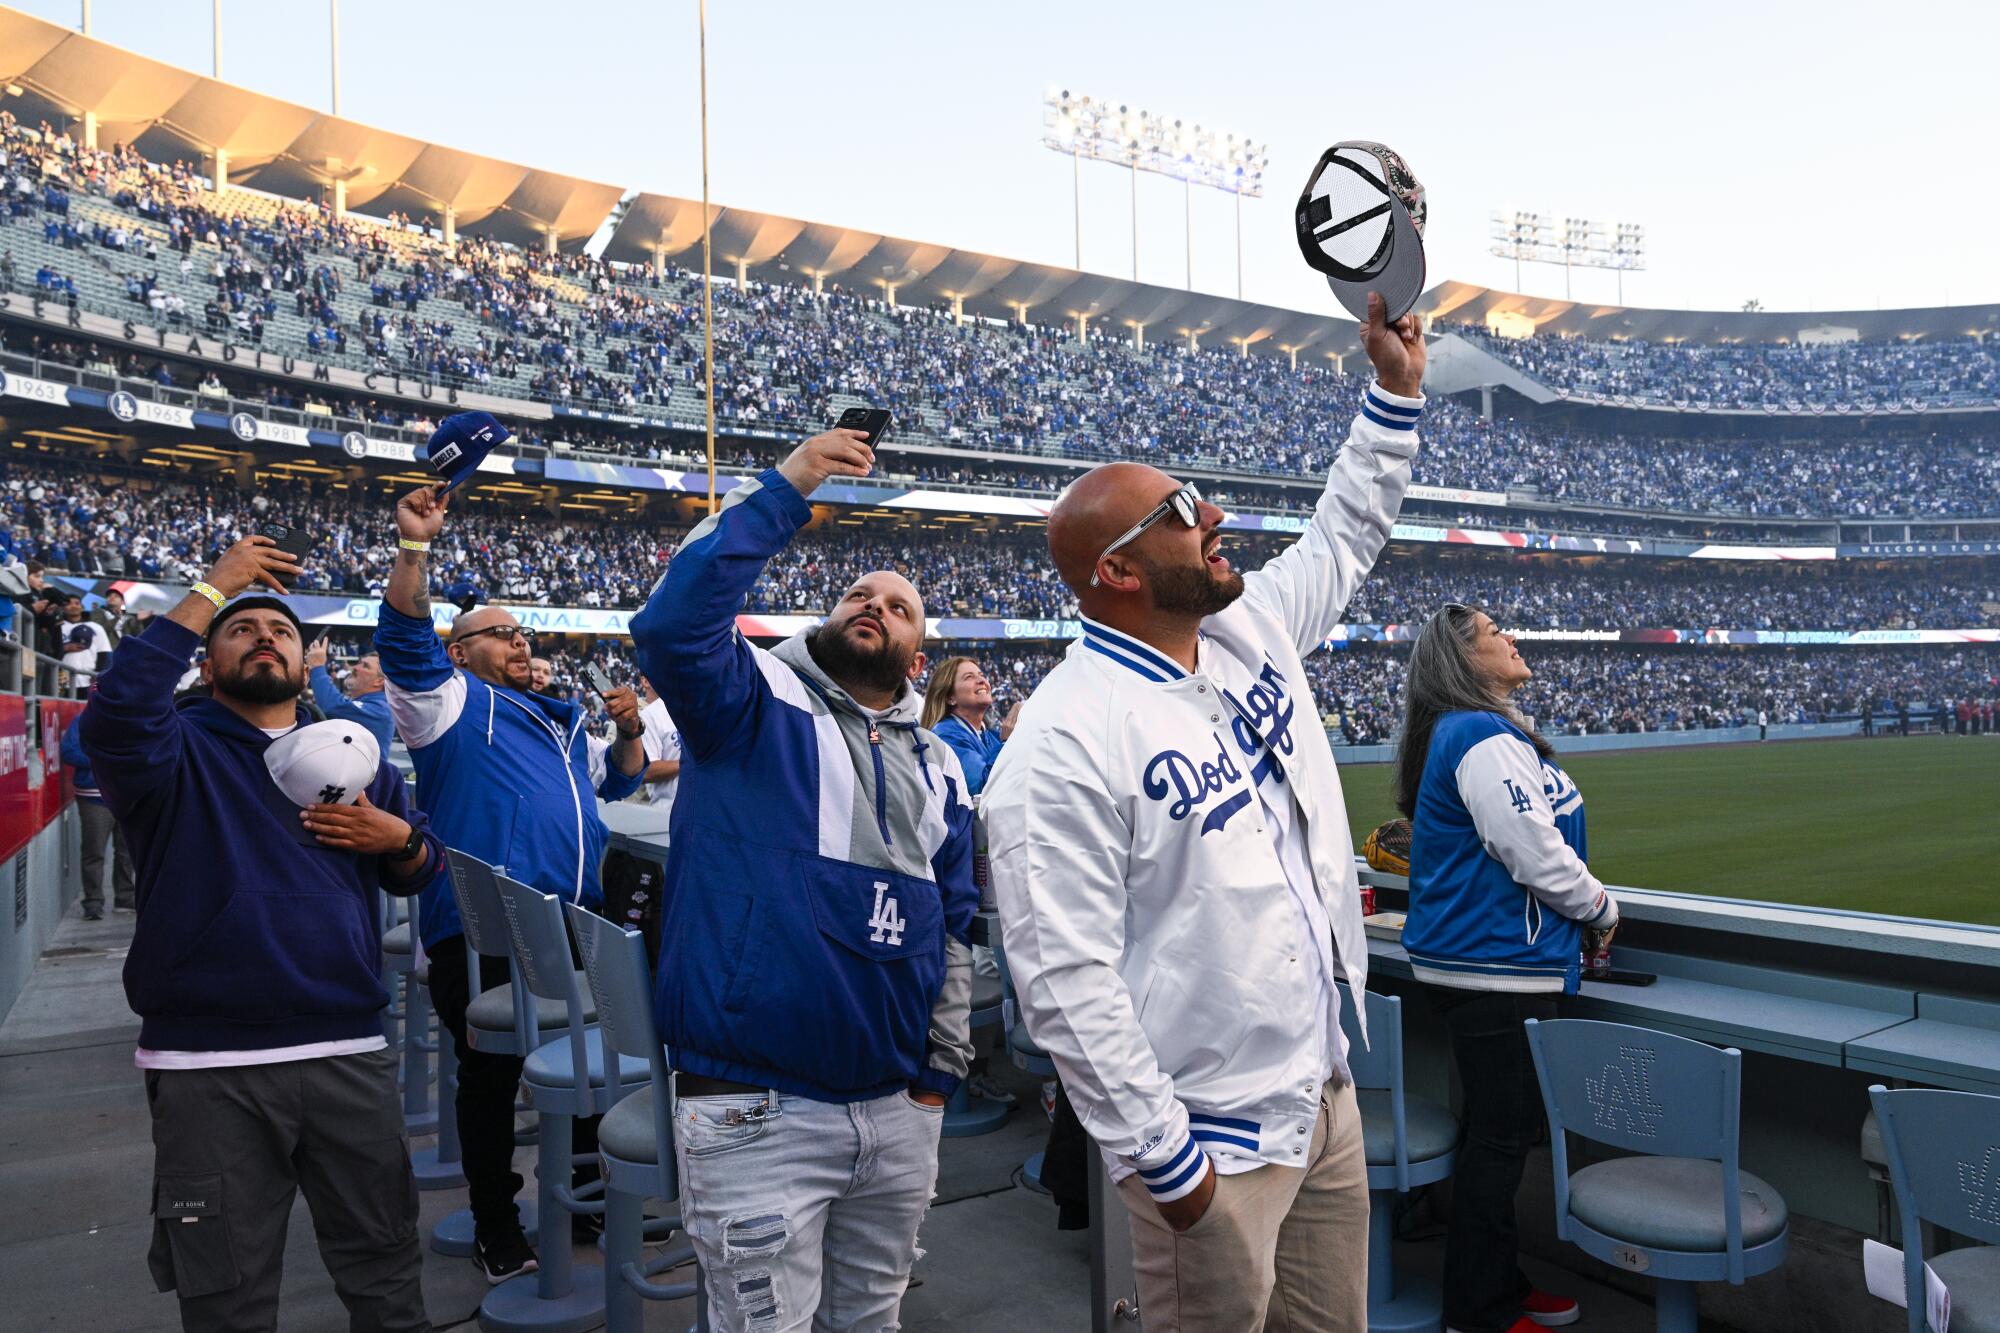 Fans remove their hats as they watch a military flyover above Dodger Stadium before the Dodgers' season opener.